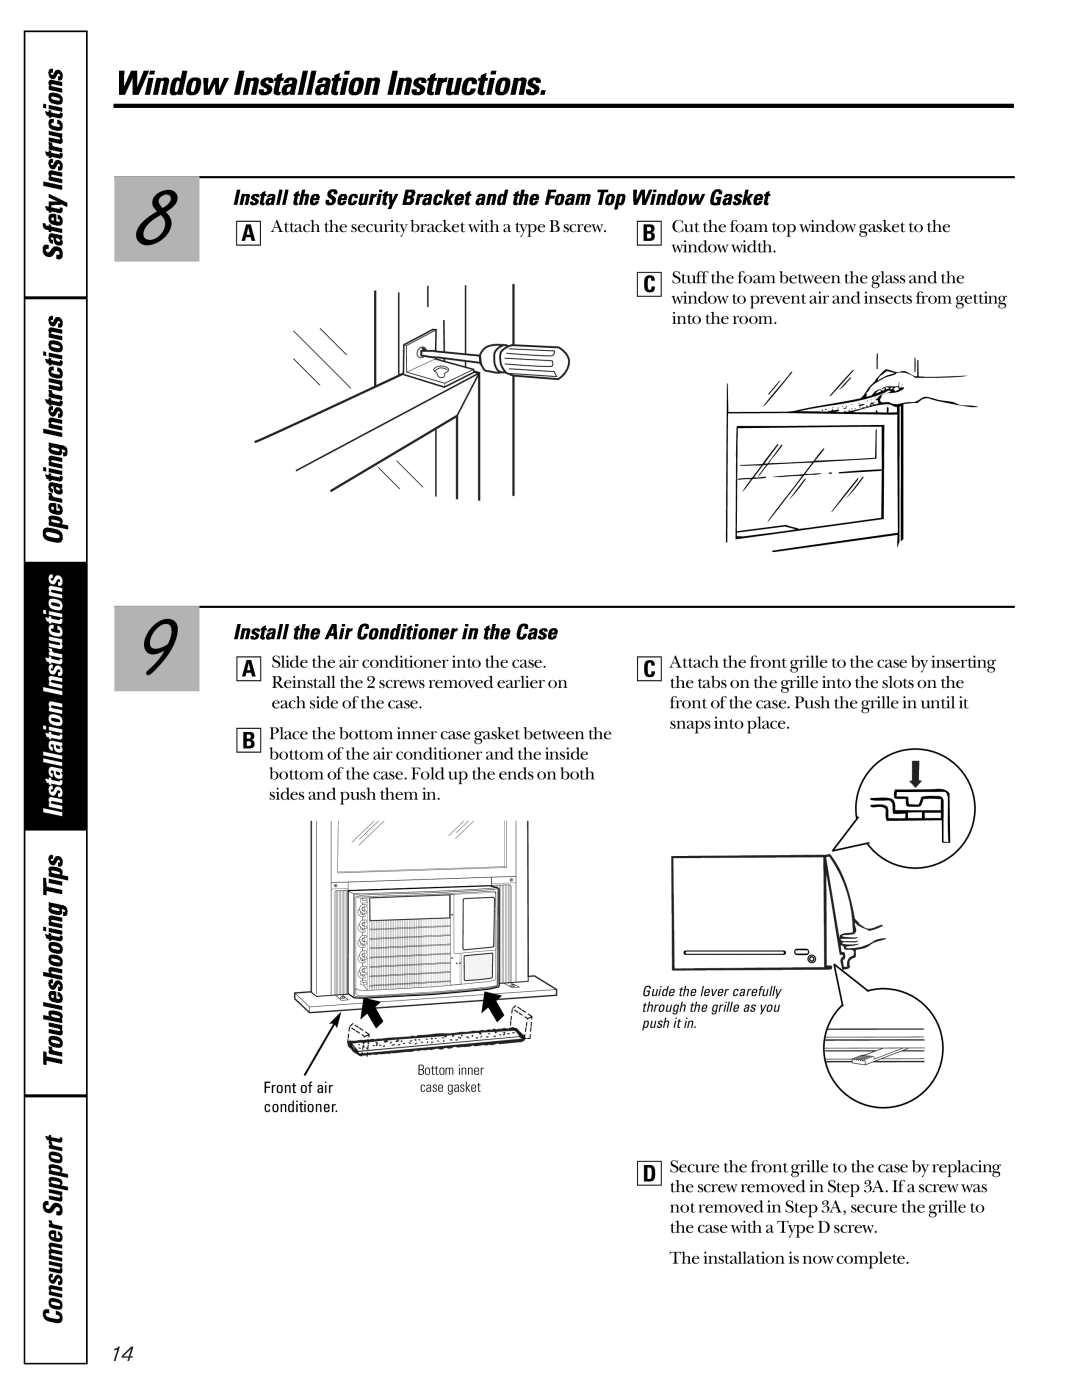 GE ASM18 Operating Instructions Safety Instructions, Consumer Support Troubleshooting, Window Installation Instructions 